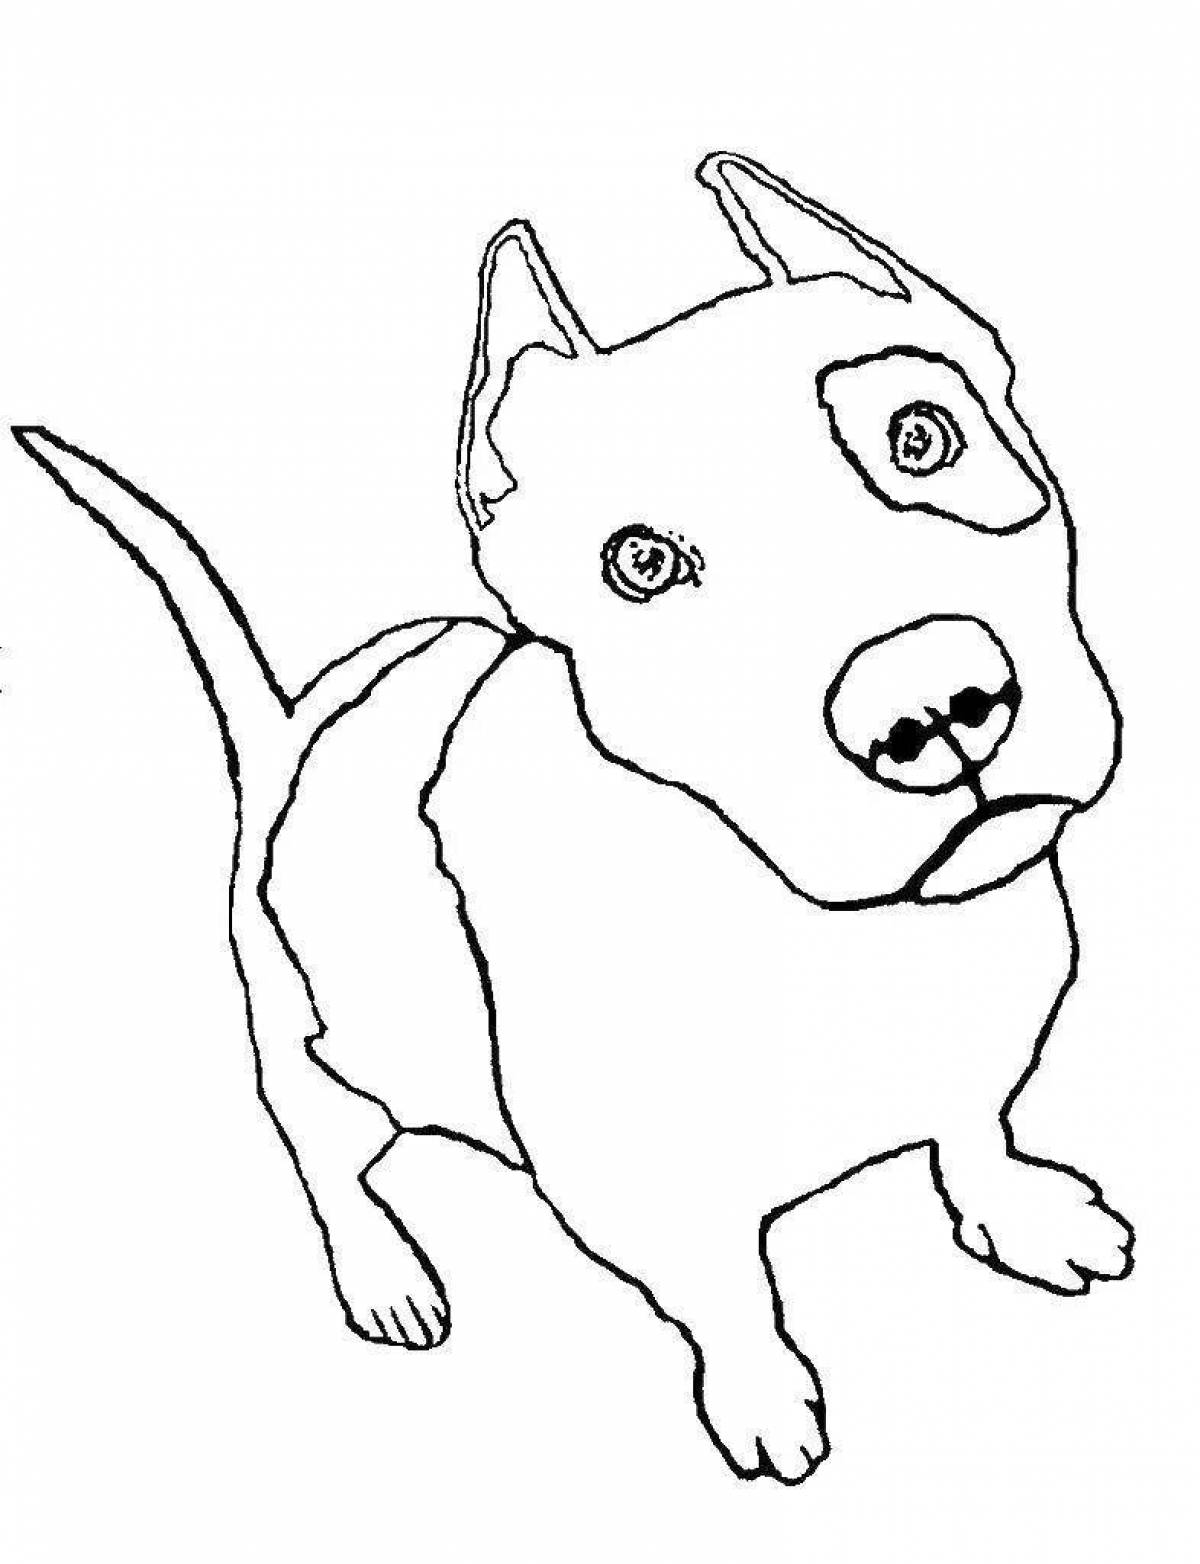 Bull terrier live coloring